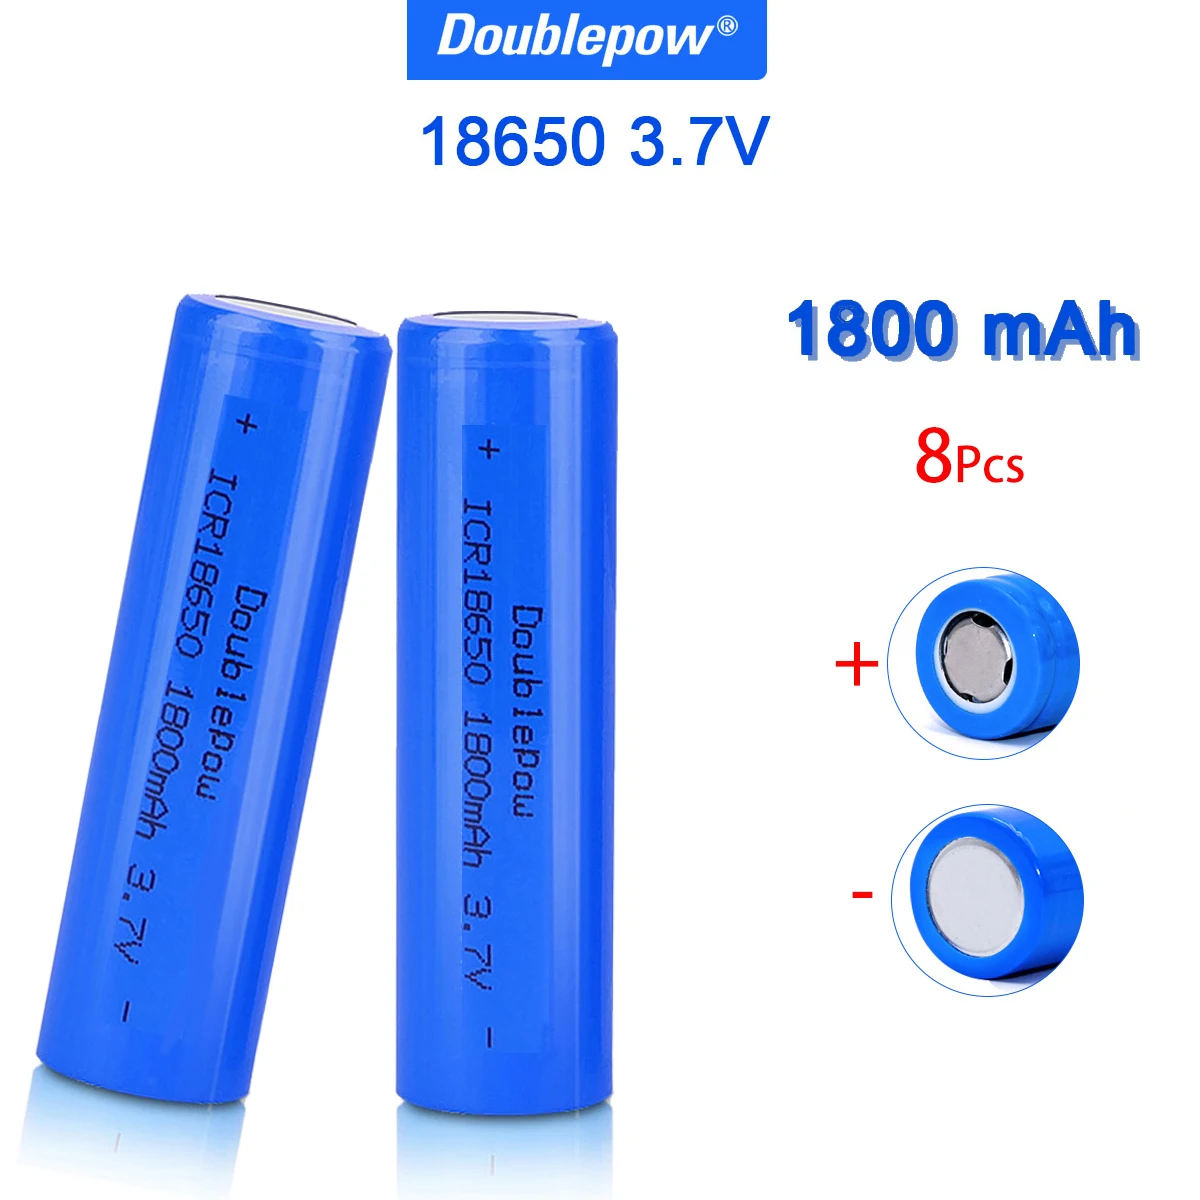 

8pcs DOUBLEPOWER 3.7V Flat Head 18650 Battery 1800mah Rechargeable Lilon Lithium Battery For Flashlight Electrical Tool Toys